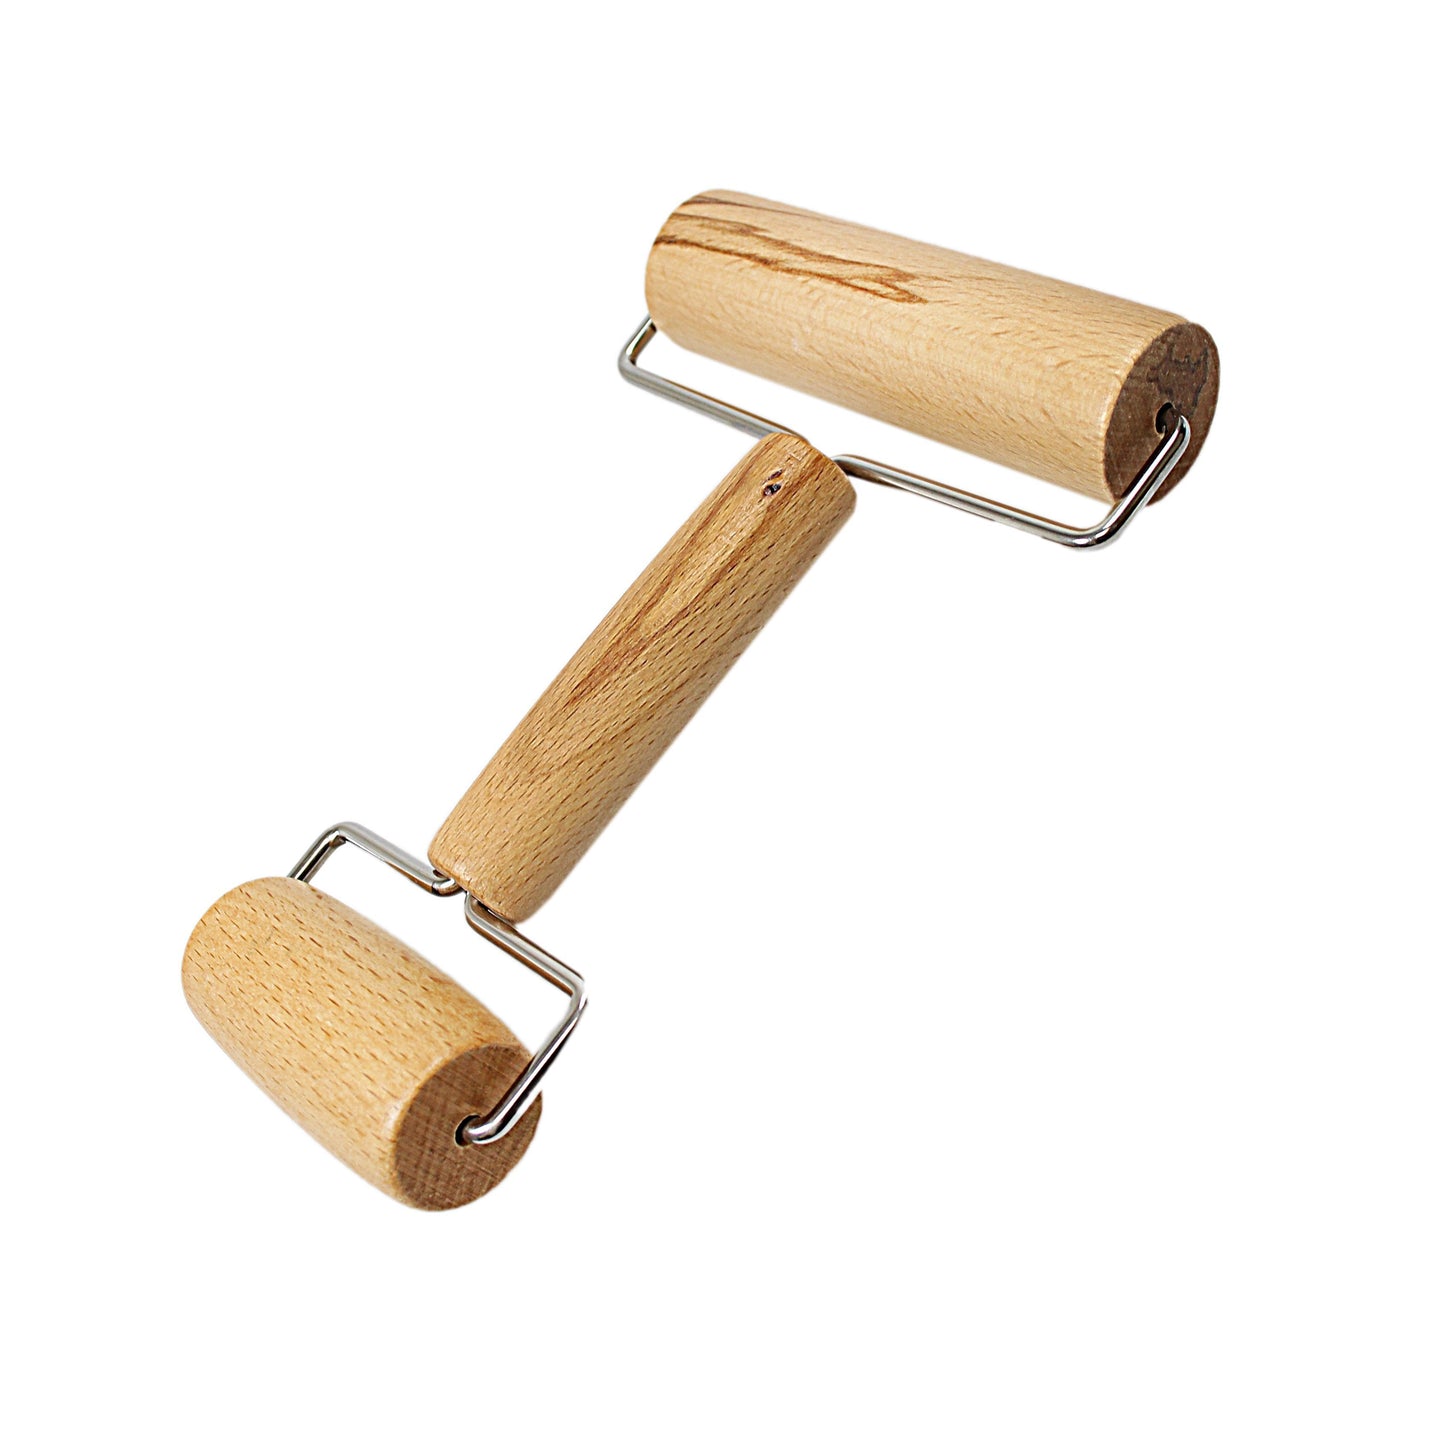 Double Sided Wooden Dough Rolling Pin 10.5 x 6 cm 4666 A  (Parcel Rate)